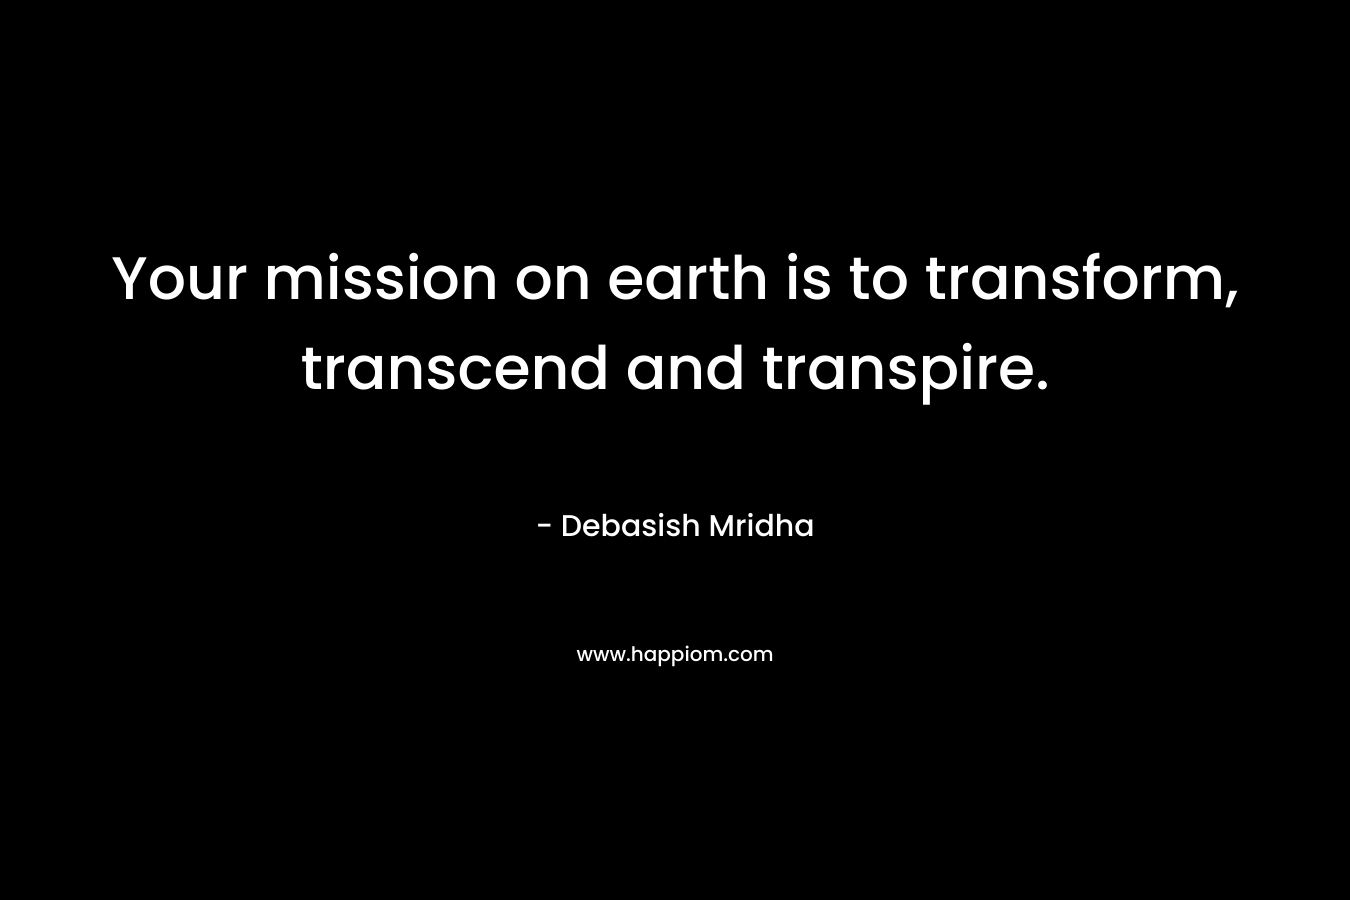 Your mission on earth is to transform, transcend and transpire.